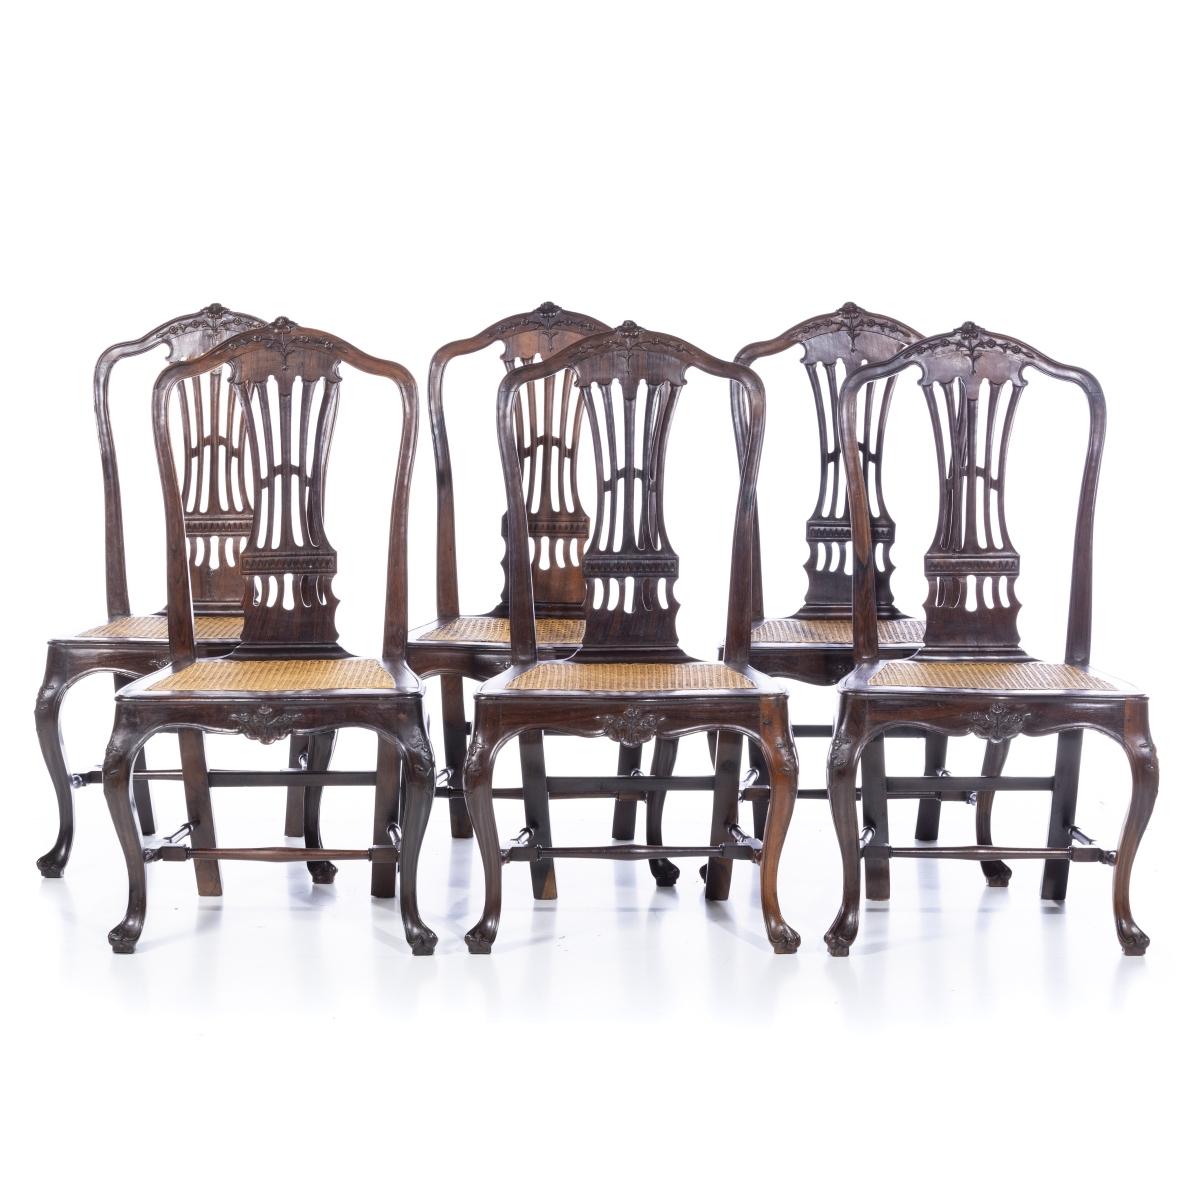 Hand-Crafted SET OF SIX PORTUGUESE CHAIRS  18th Century in Brazilian Rosewood